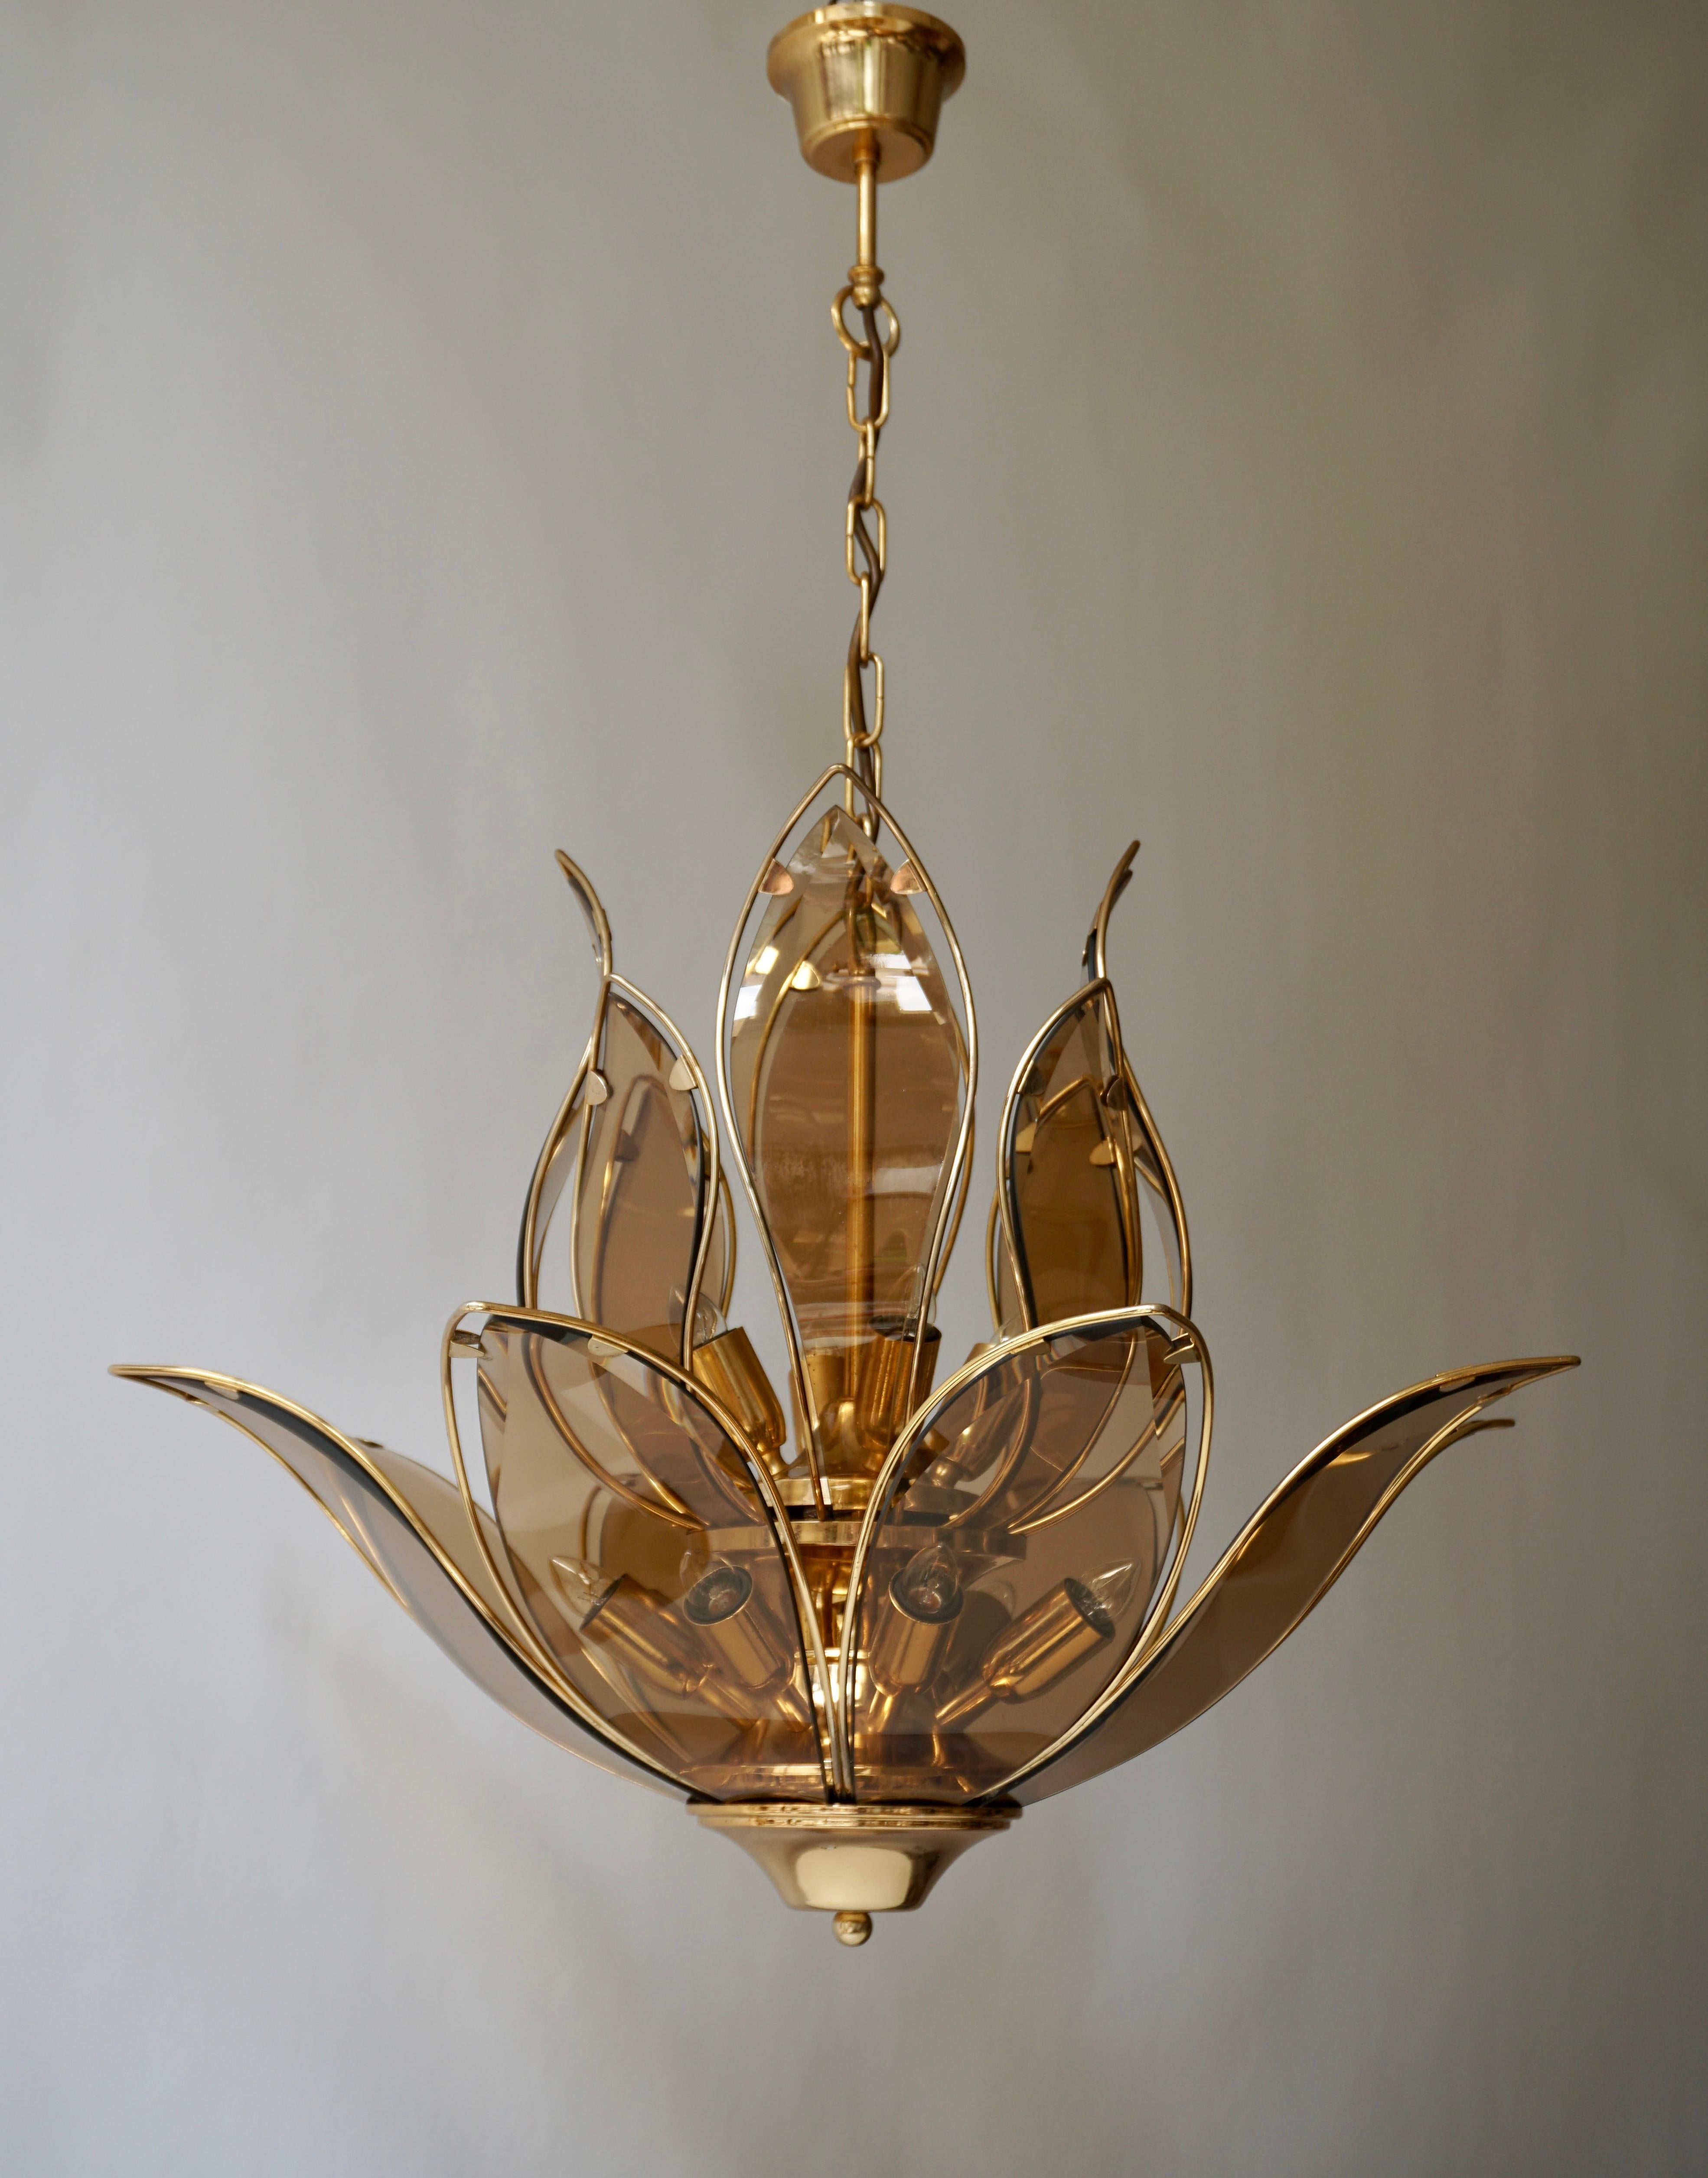 Three outstanding and highly elegant brass and Murano glass chandelier in lotus flower shape of very good quality. This chandelier dates from the 1970s and is Italian by origin. 

The light requires twelve single E14 screw fit lightbulbs (60Watt